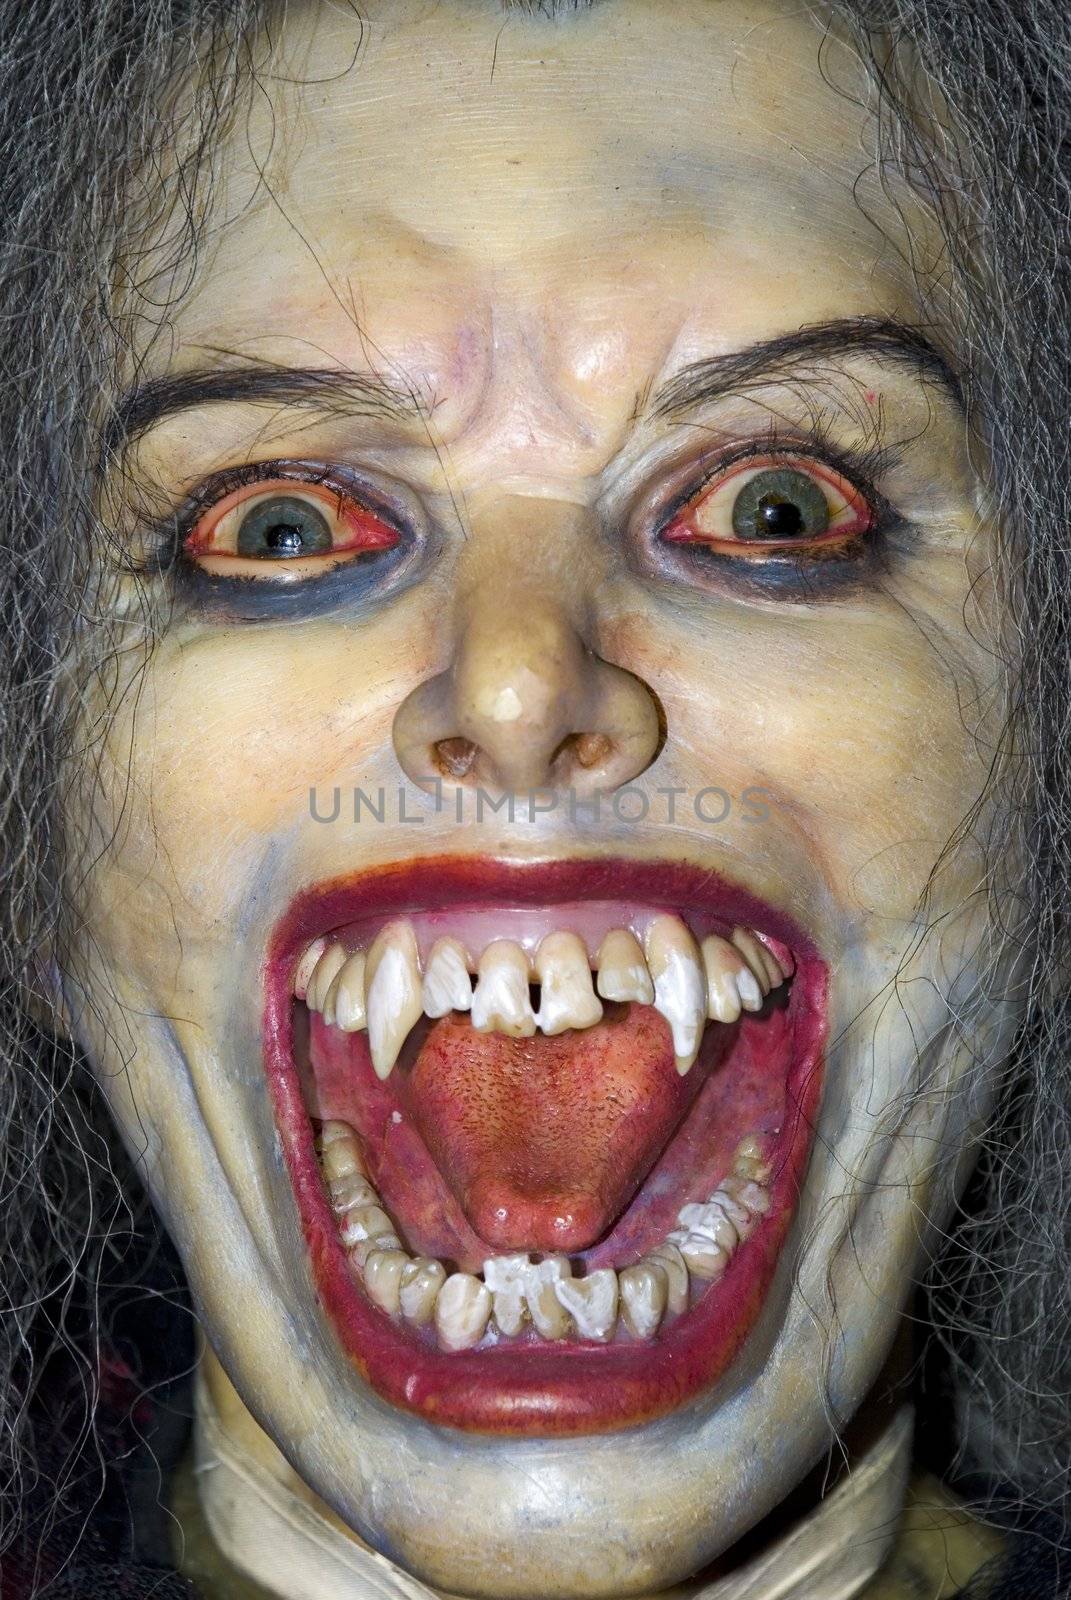 The face of the vampire. A wax figure of the woman - the vampire